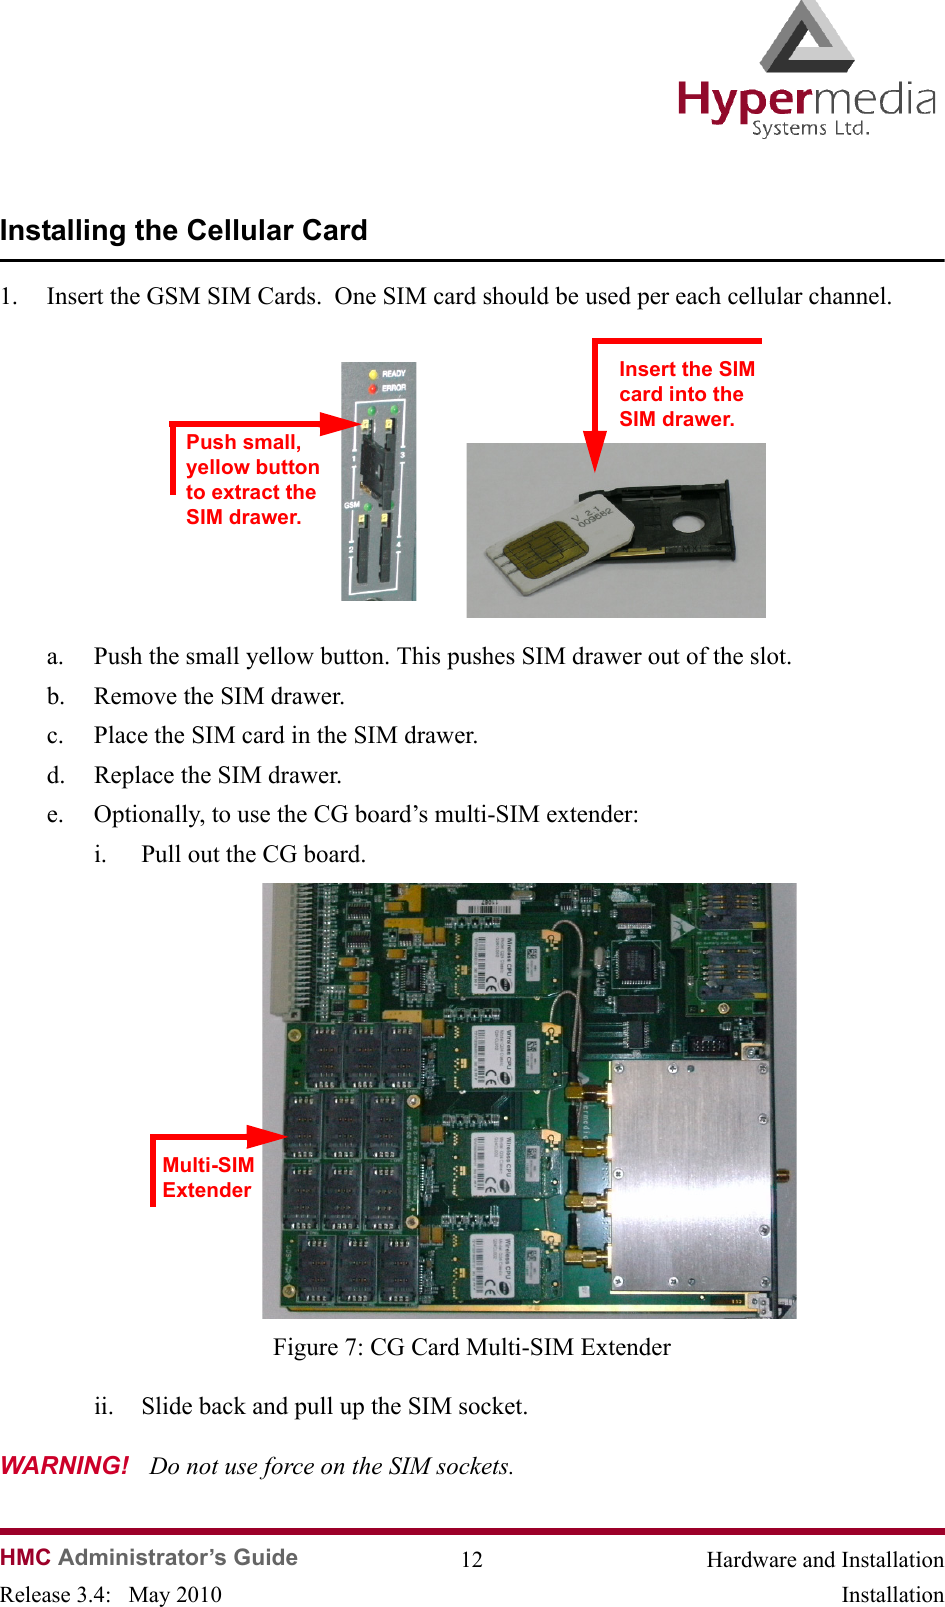   HMC Administrator’s Guide 12 Hardware and InstallationRelease 3.4:   May 2010 InstallationInstalling the Cellular Card1. Insert the GSM SIM Cards.  One SIM card should be used per each cellular channel.              a. Push the small yellow button. This pushes SIM drawer out of the slot.b. Remove the SIM drawer.c. Place the SIM card in the SIM drawer.d. Replace the SIM drawer.e. Optionally, to use the CG board’s multi-SIM extender:i. Pull out the CG board.                Figure 7: CG Card Multi-SIM Extenderii. Slide back and pull up the SIM socket.  WARNING!   Do not use force on the SIM sockets.Push small, yellow button to extract the  SIM drawer.Insert the SIM card into the SIM drawer.Multi-SIM Extender